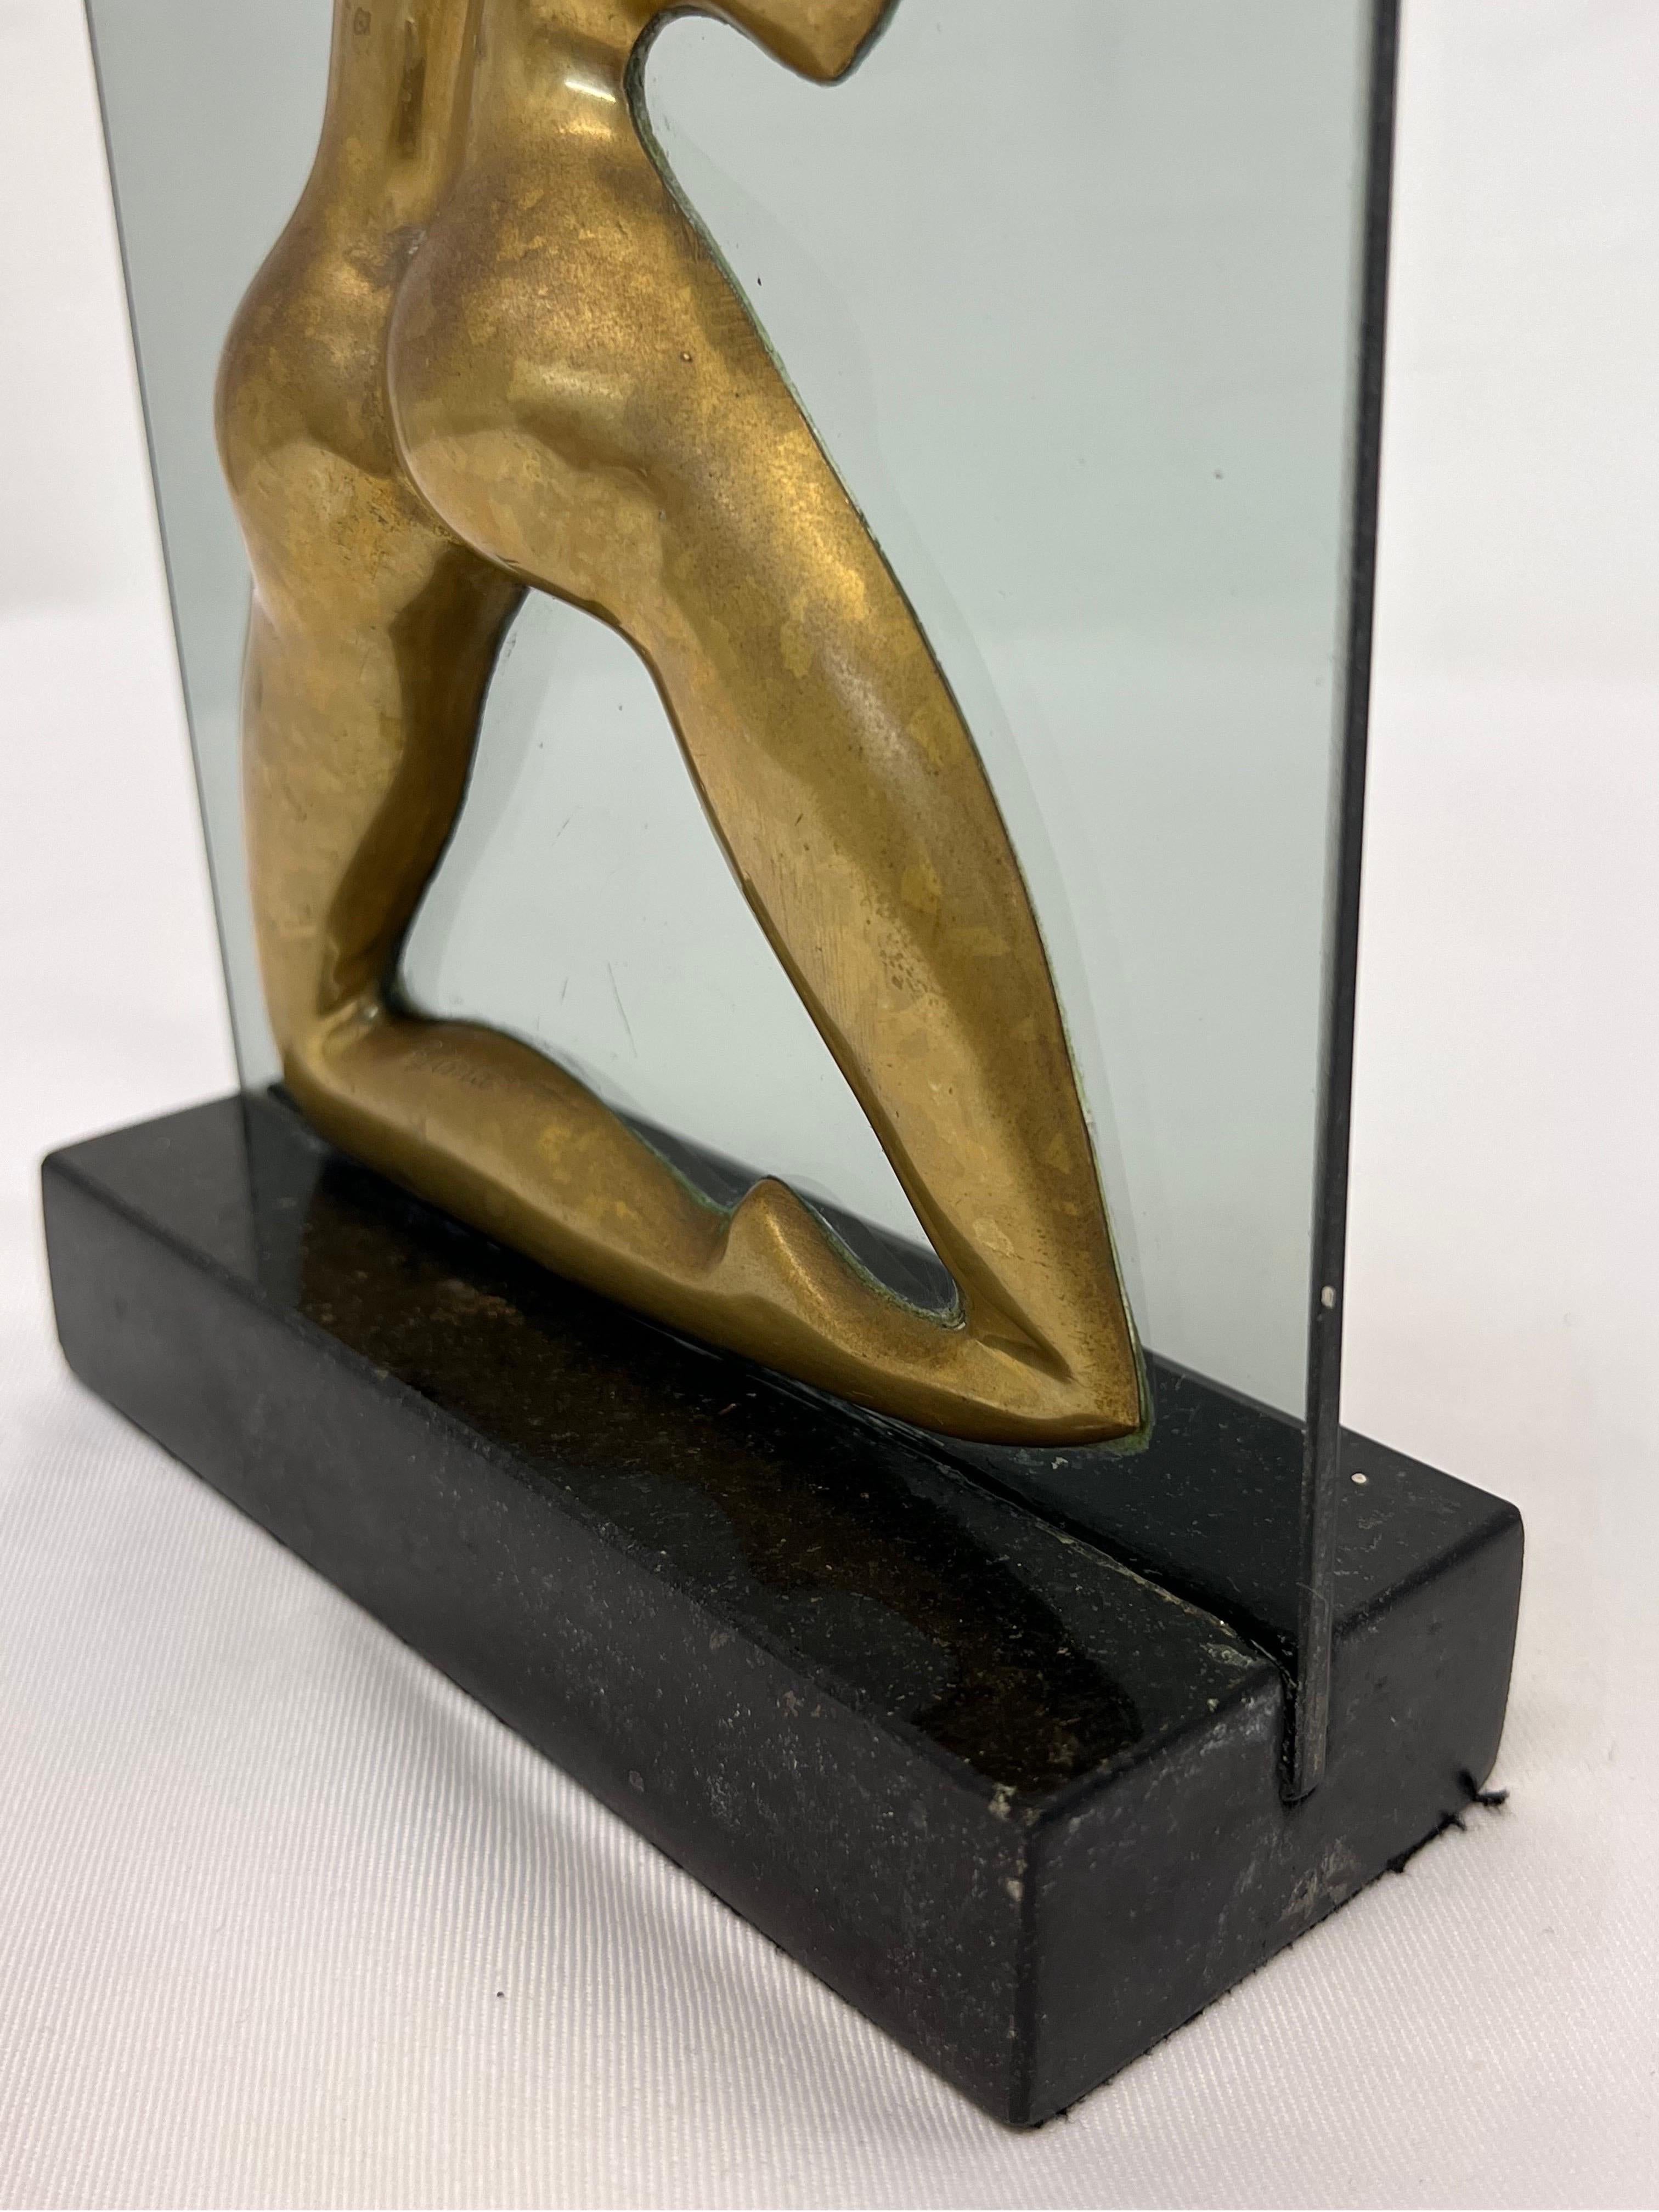 Brazilian Mid-Century Modern Bronze Sculpture on Glass and Granite Base, 1960s For Sale 5